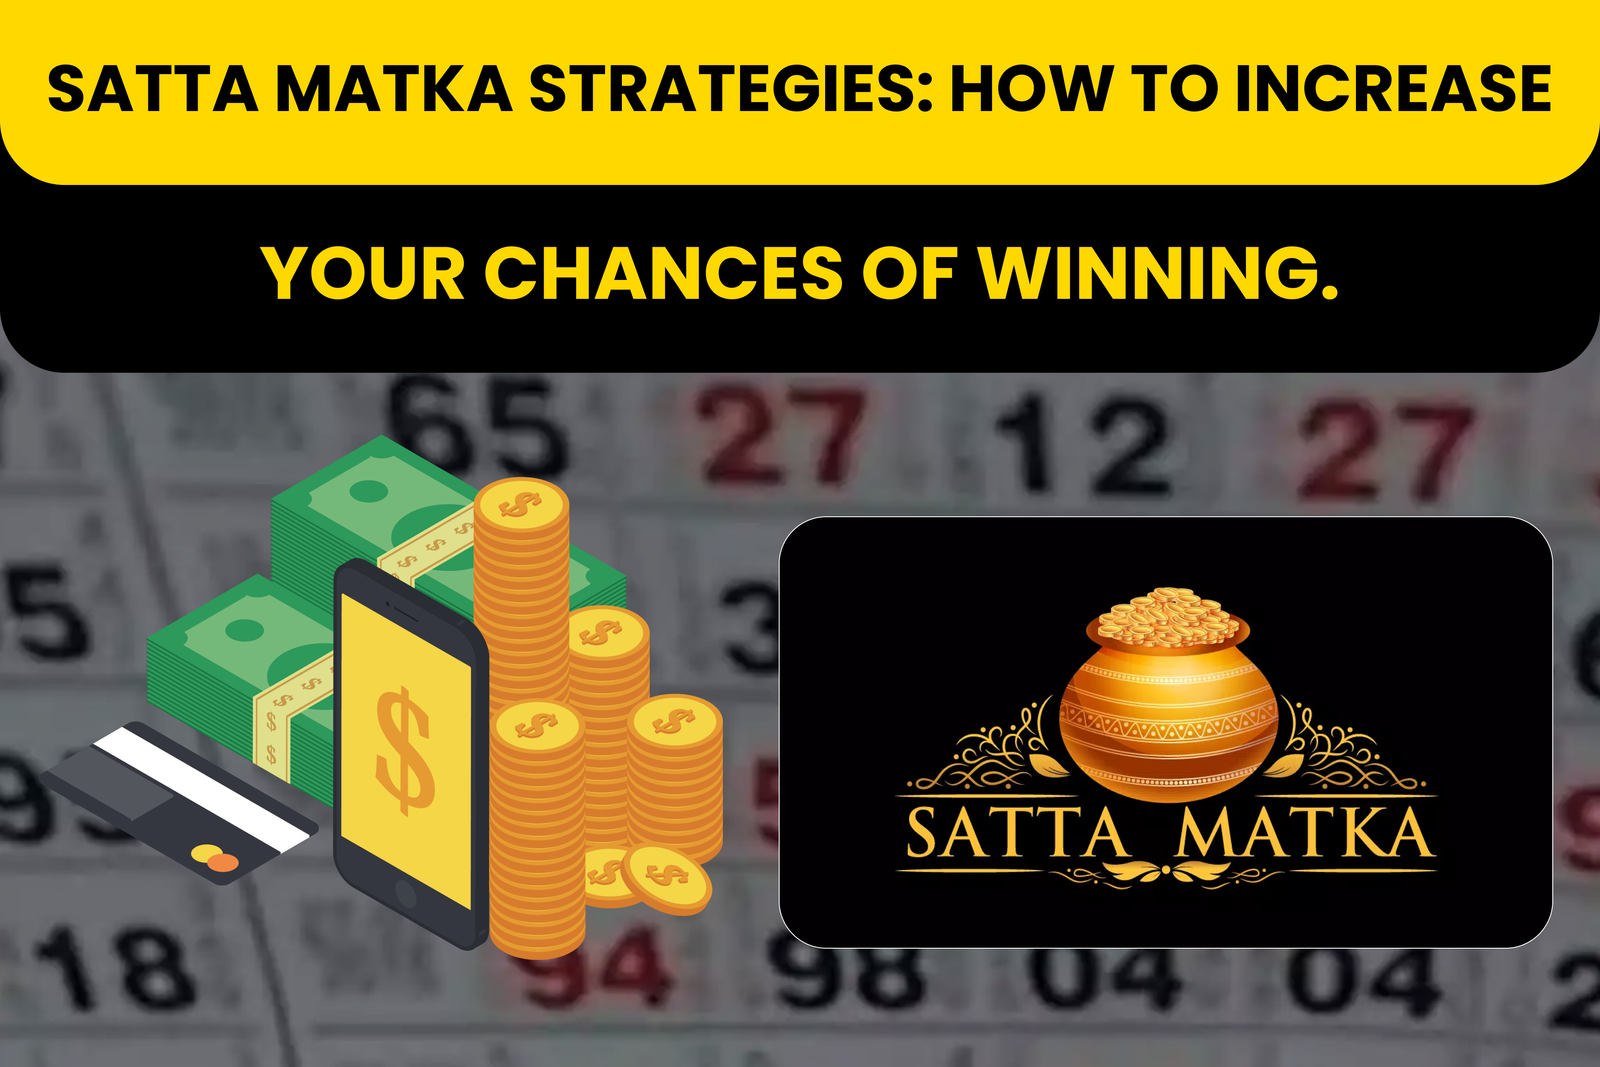 Satta Matka Strategies: How to Increase Your Chances of Winning